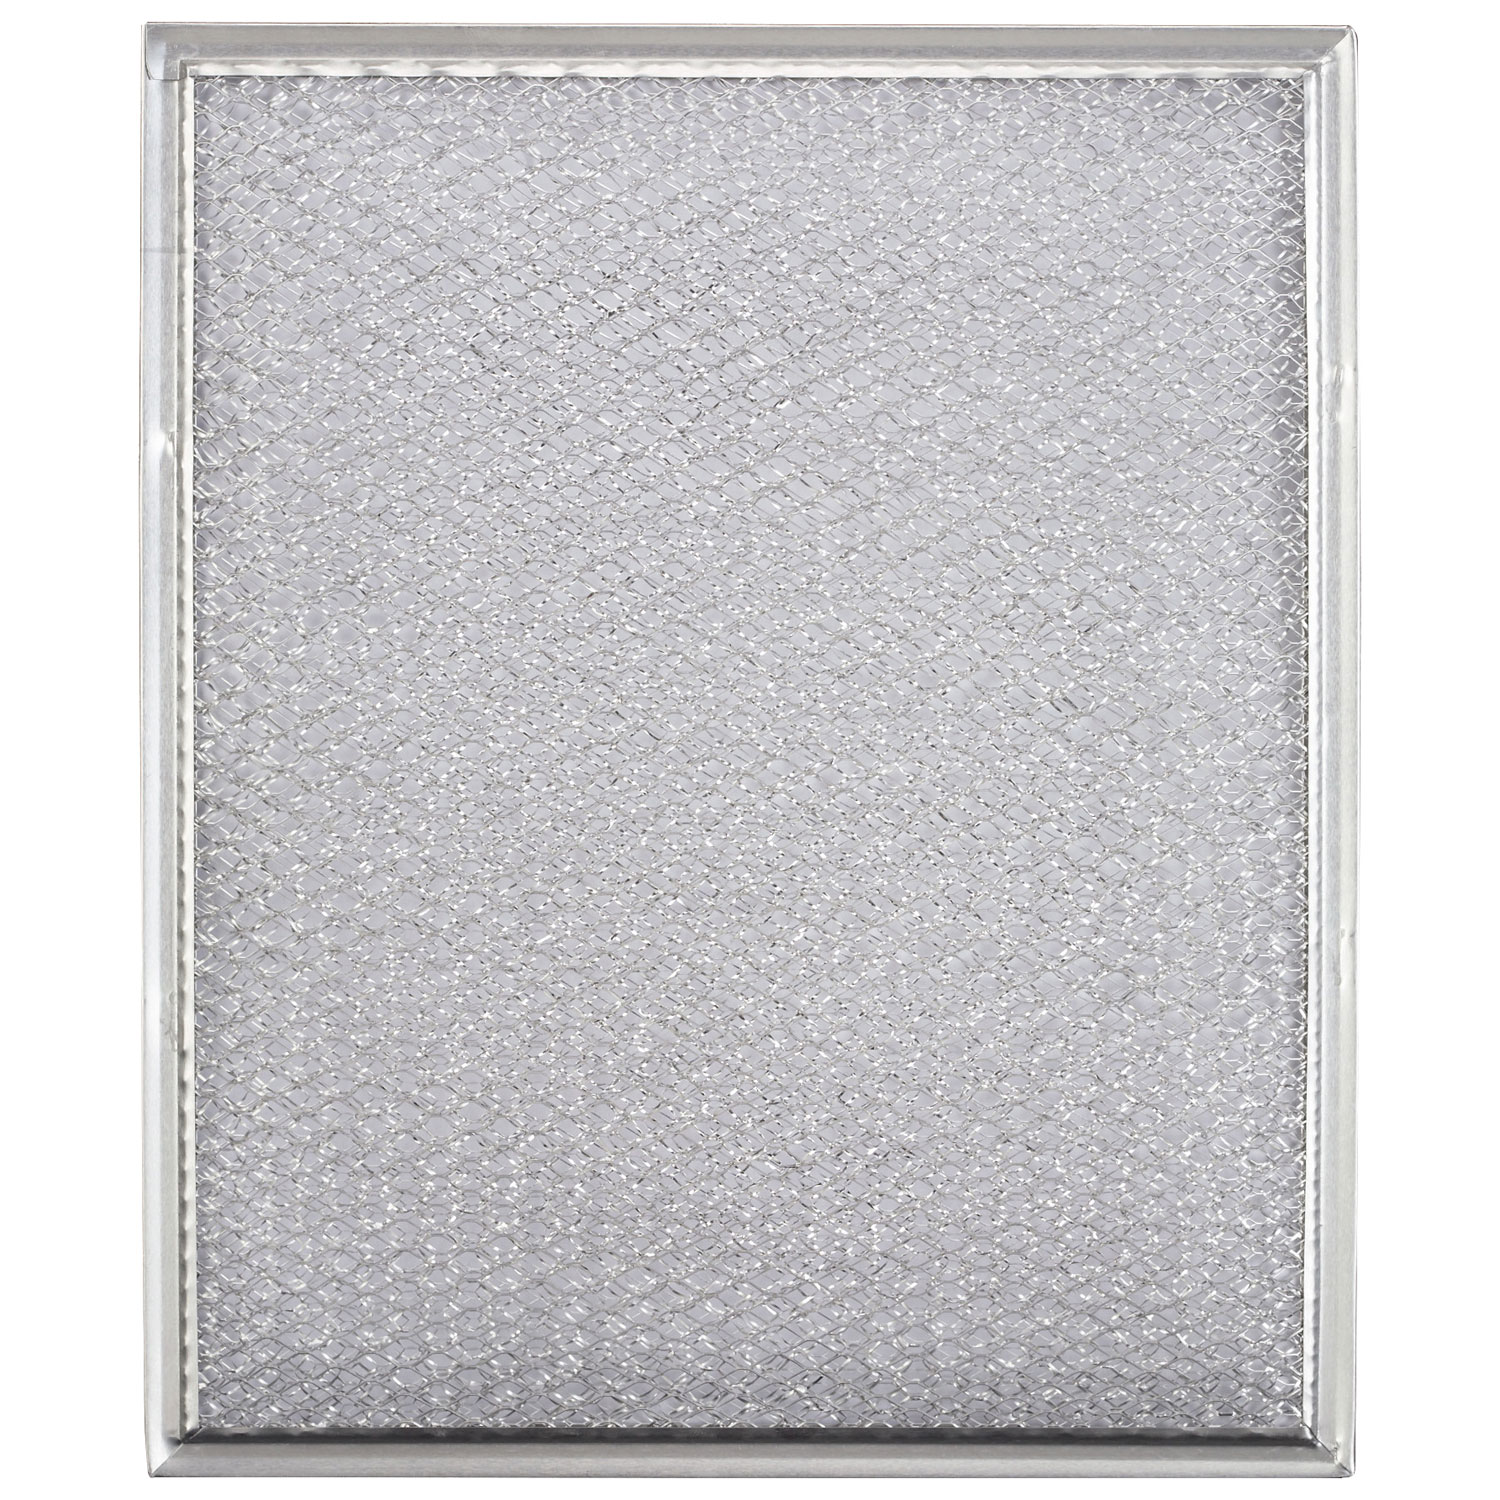 Broan Aluminum Replacement Grease Filter (BP29) - Stainless Steel